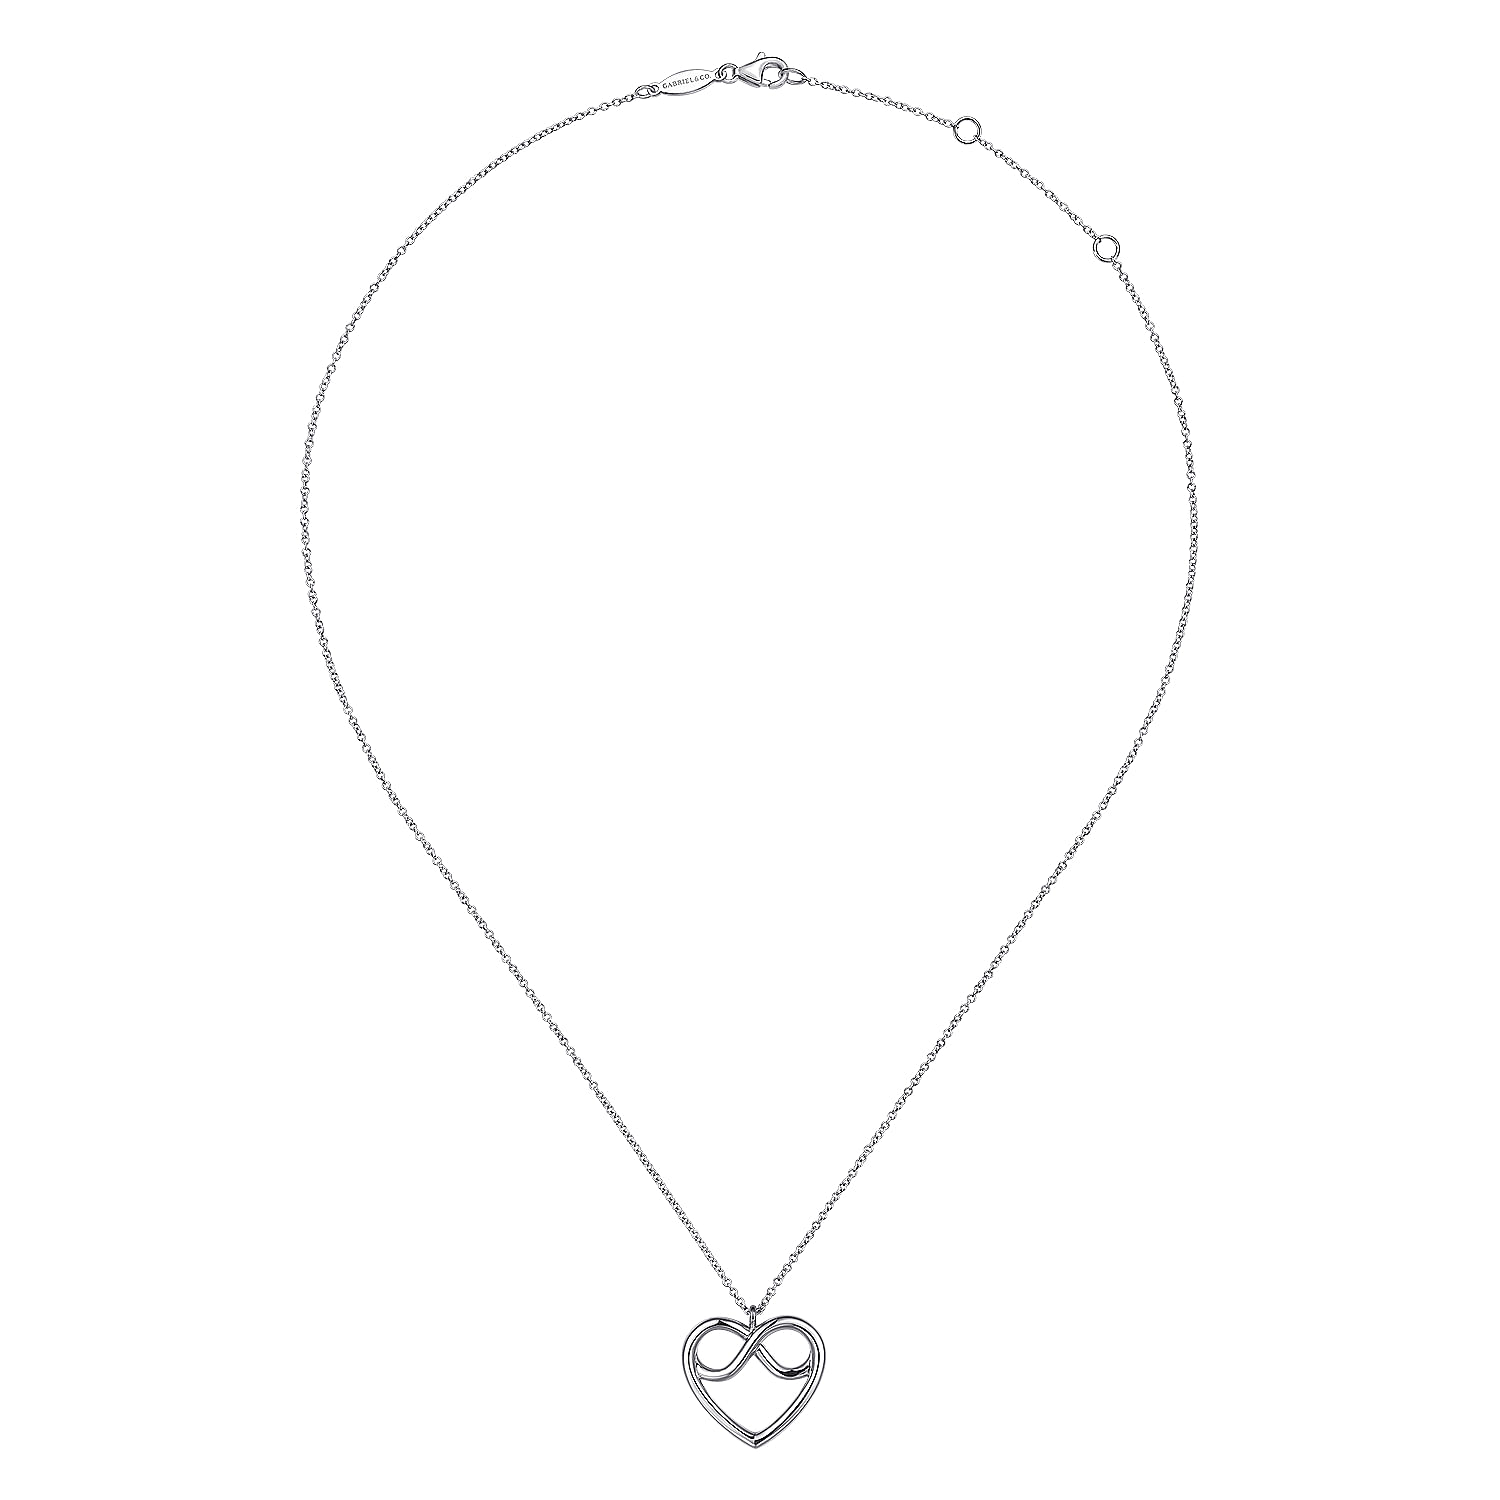 925 Sterling Silver Infinity Heart Pendant Necklace